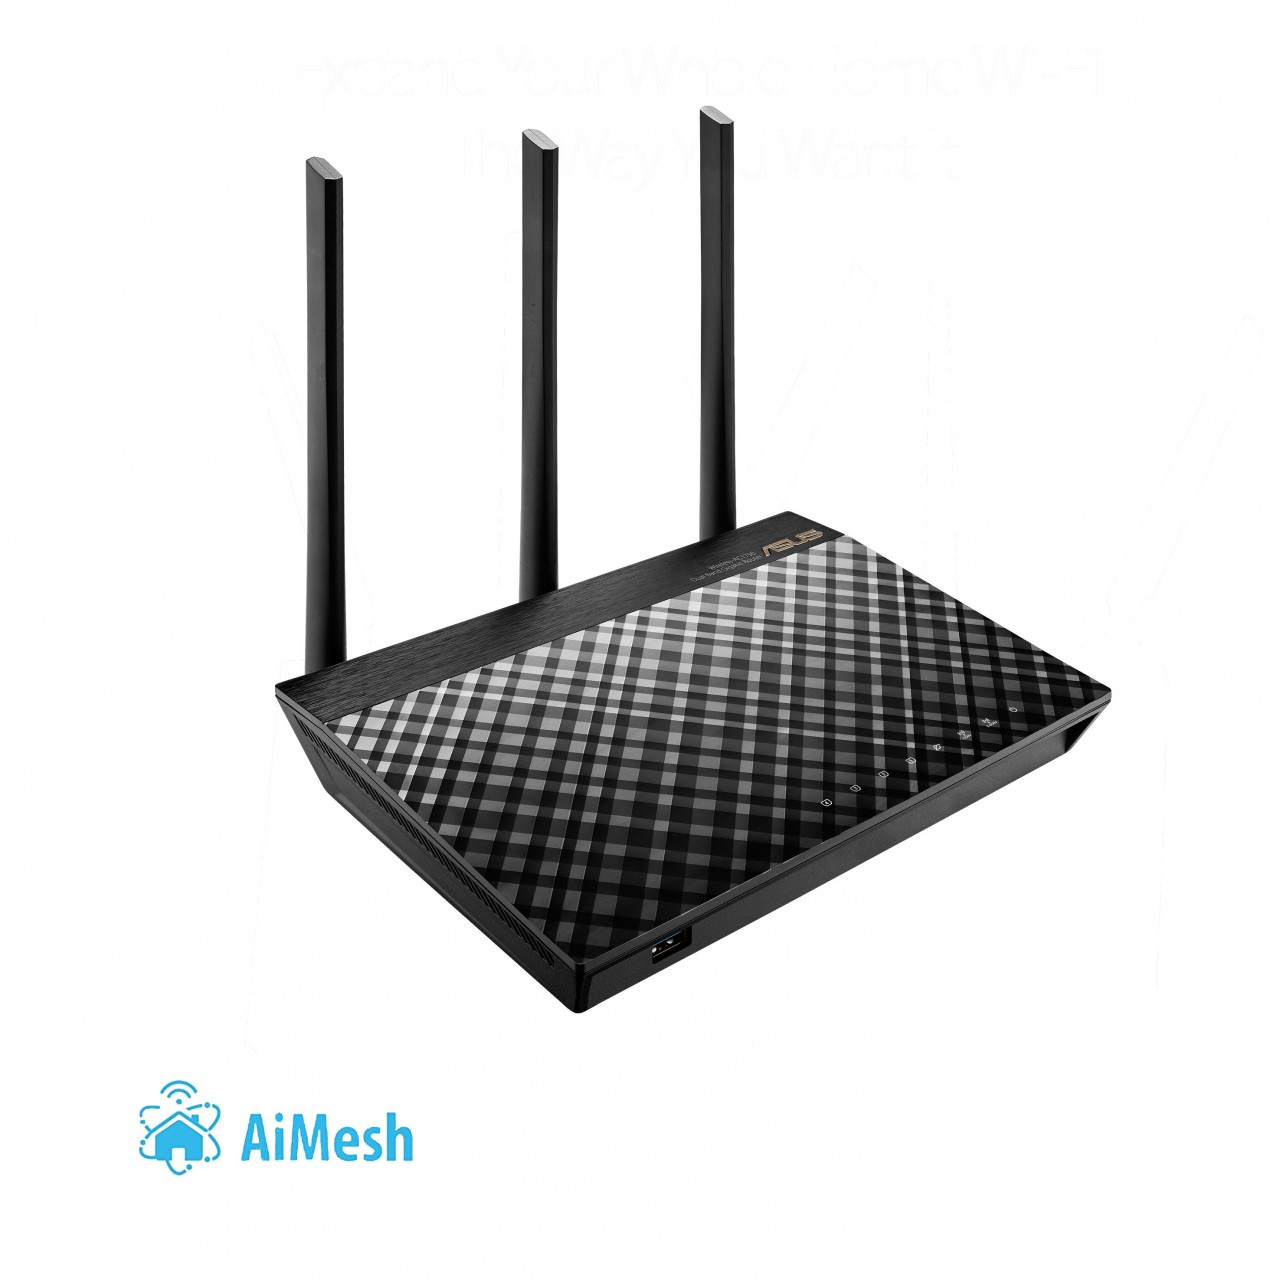 2. ASUS Dual-Band Wireless Gigabit Router RT-AC66U B1 -AC1750 – 1750 Mbps speed -– AiMesh - AiProtec